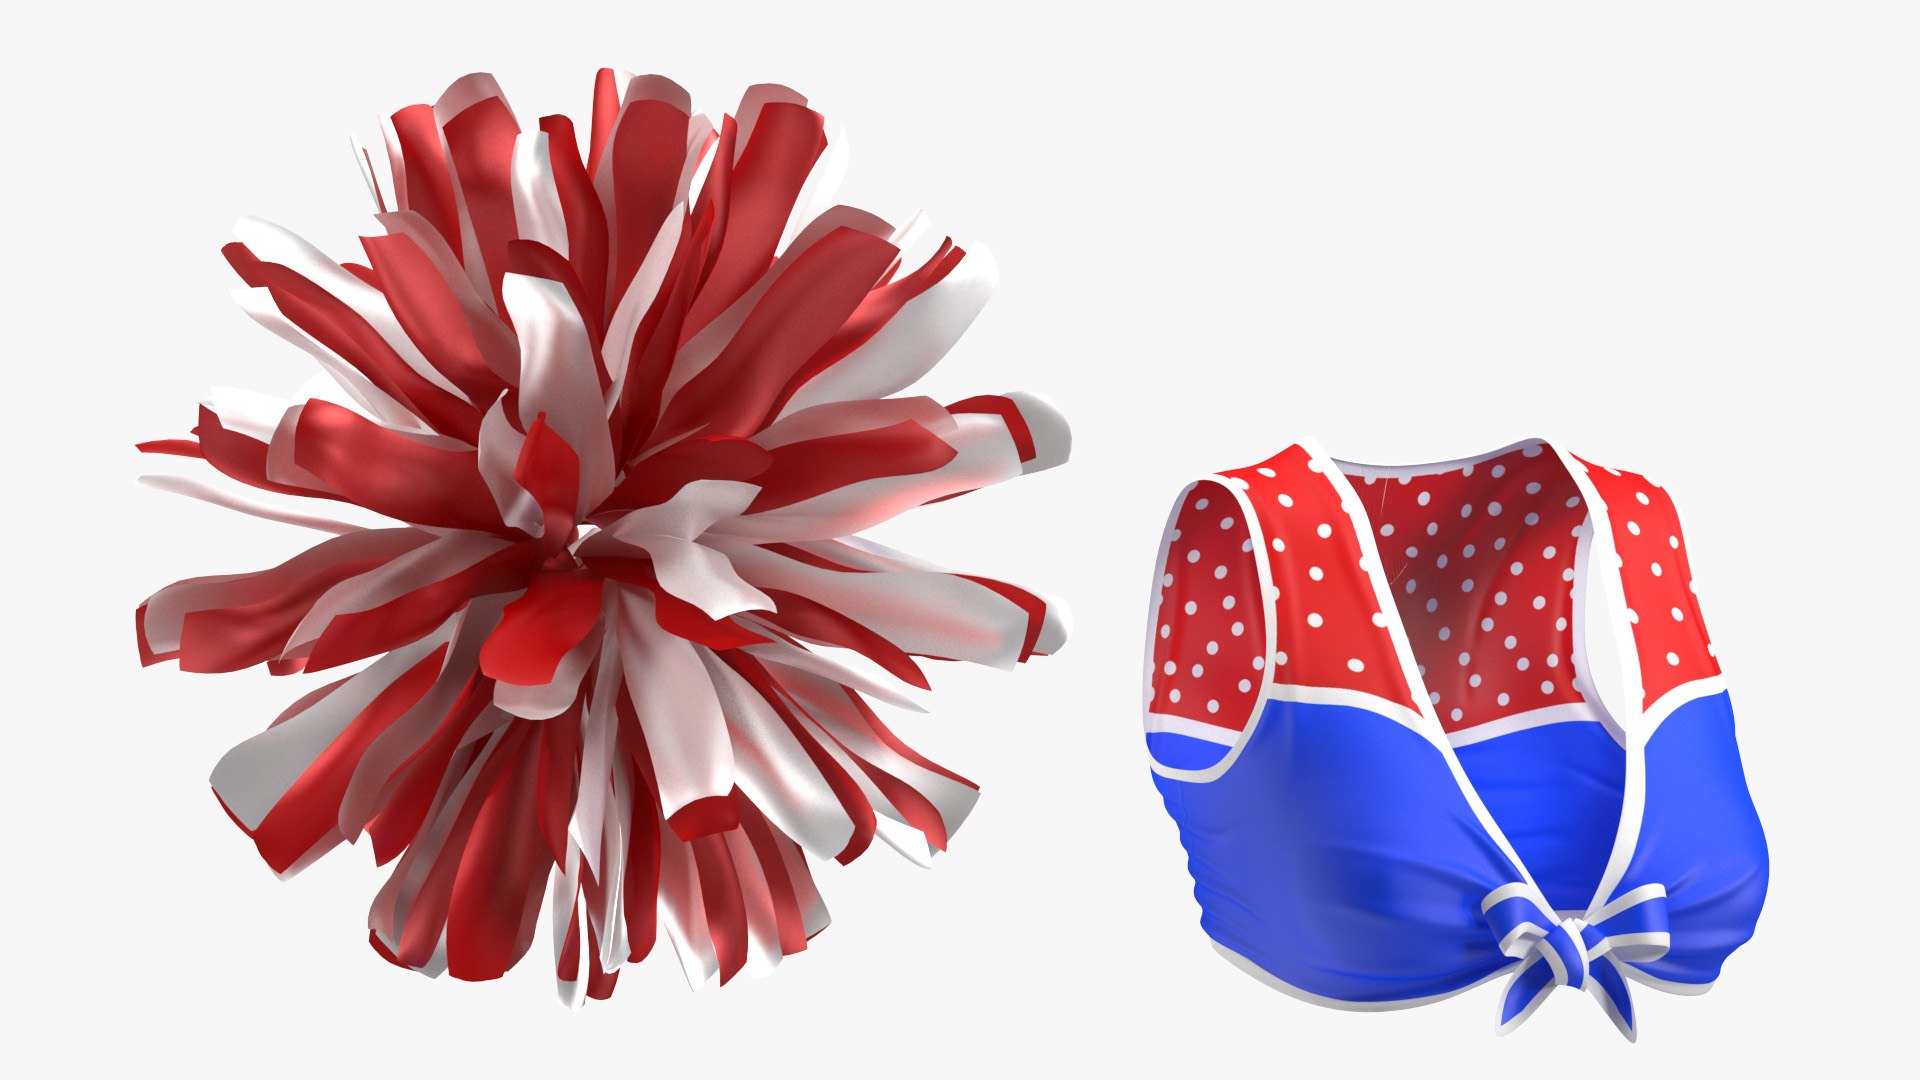 Costume Gallery  Red, White & Blue Pom Poms Separates Costume